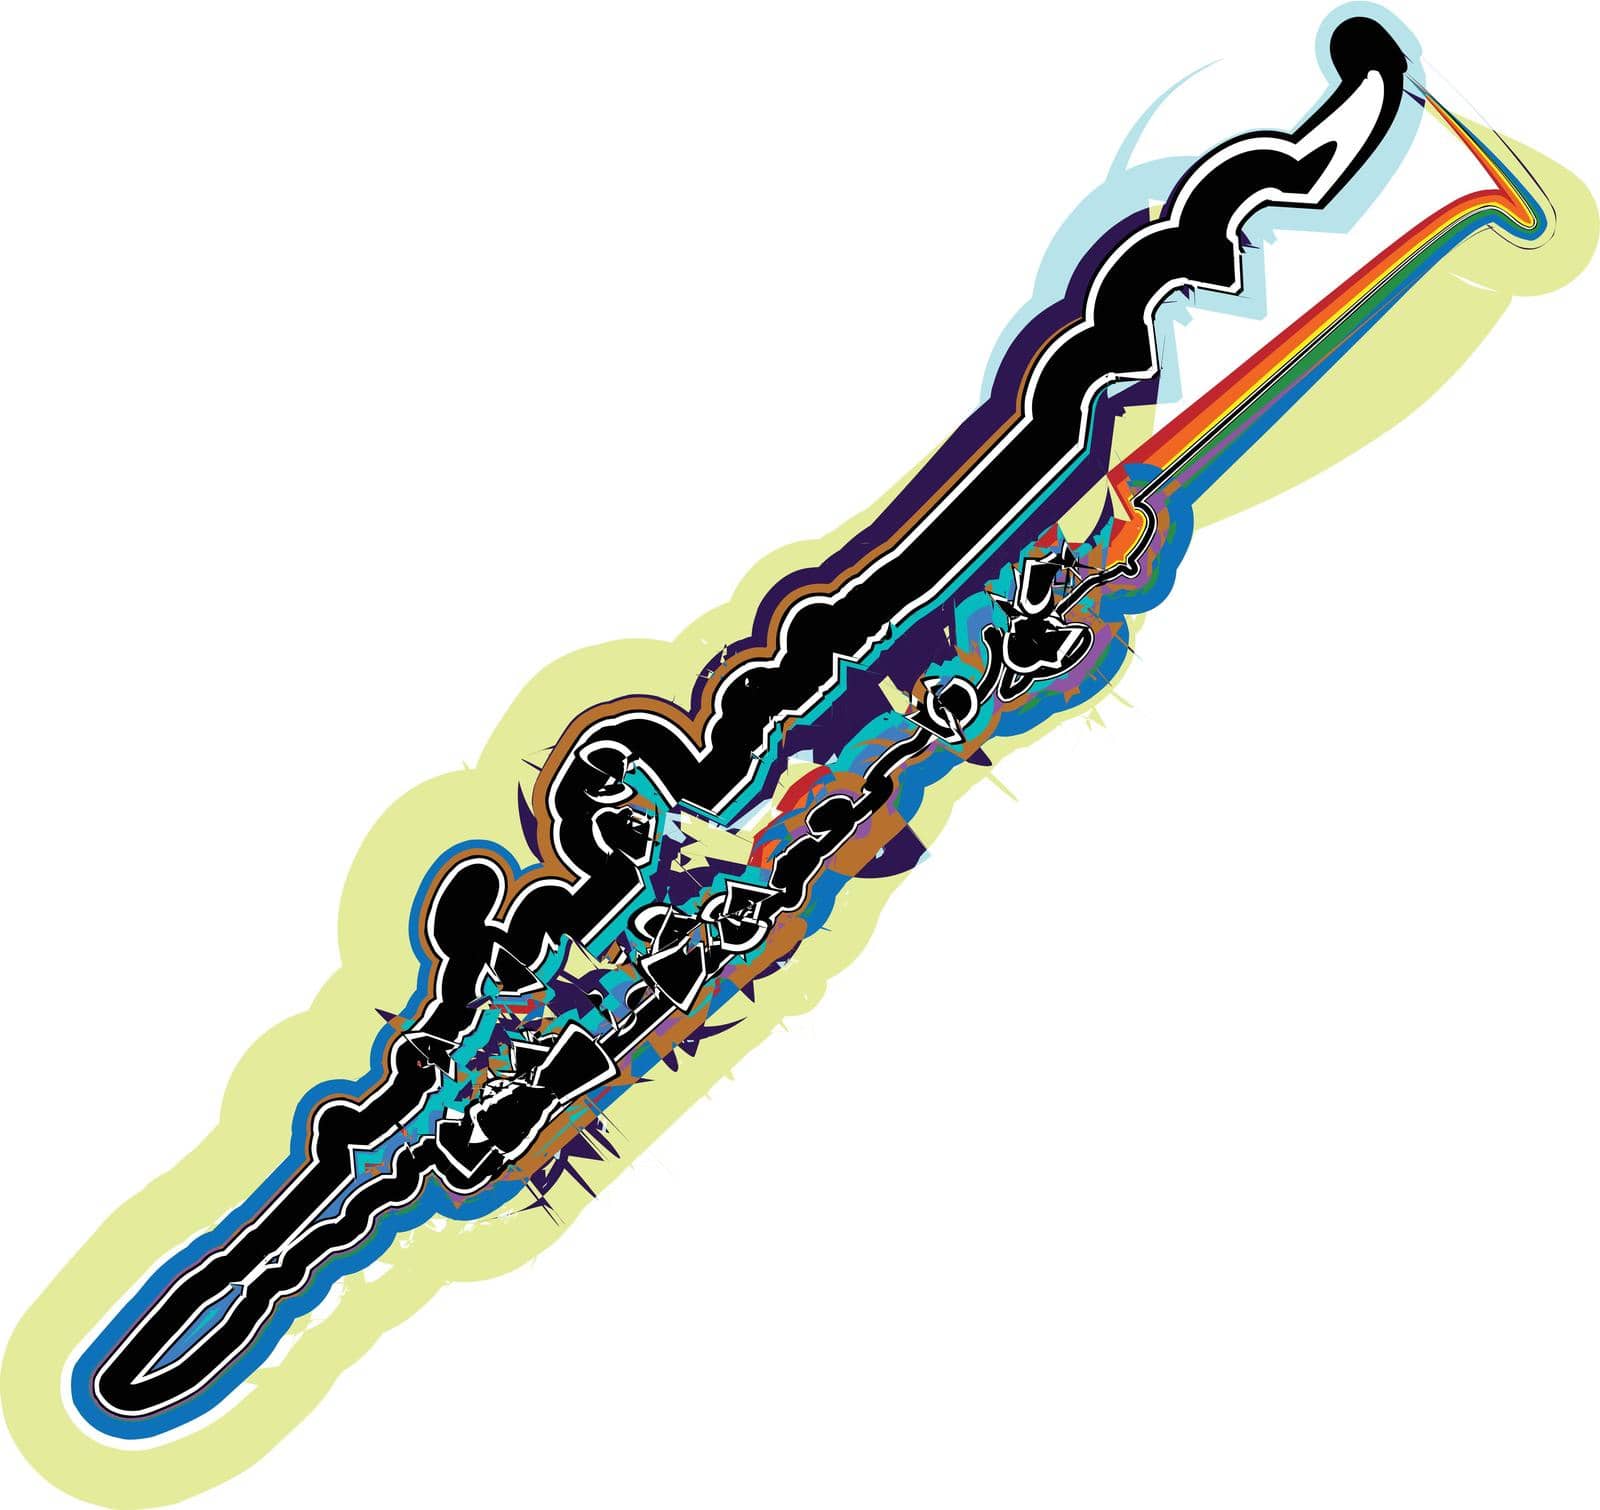 abstract Flute illustration by aroas